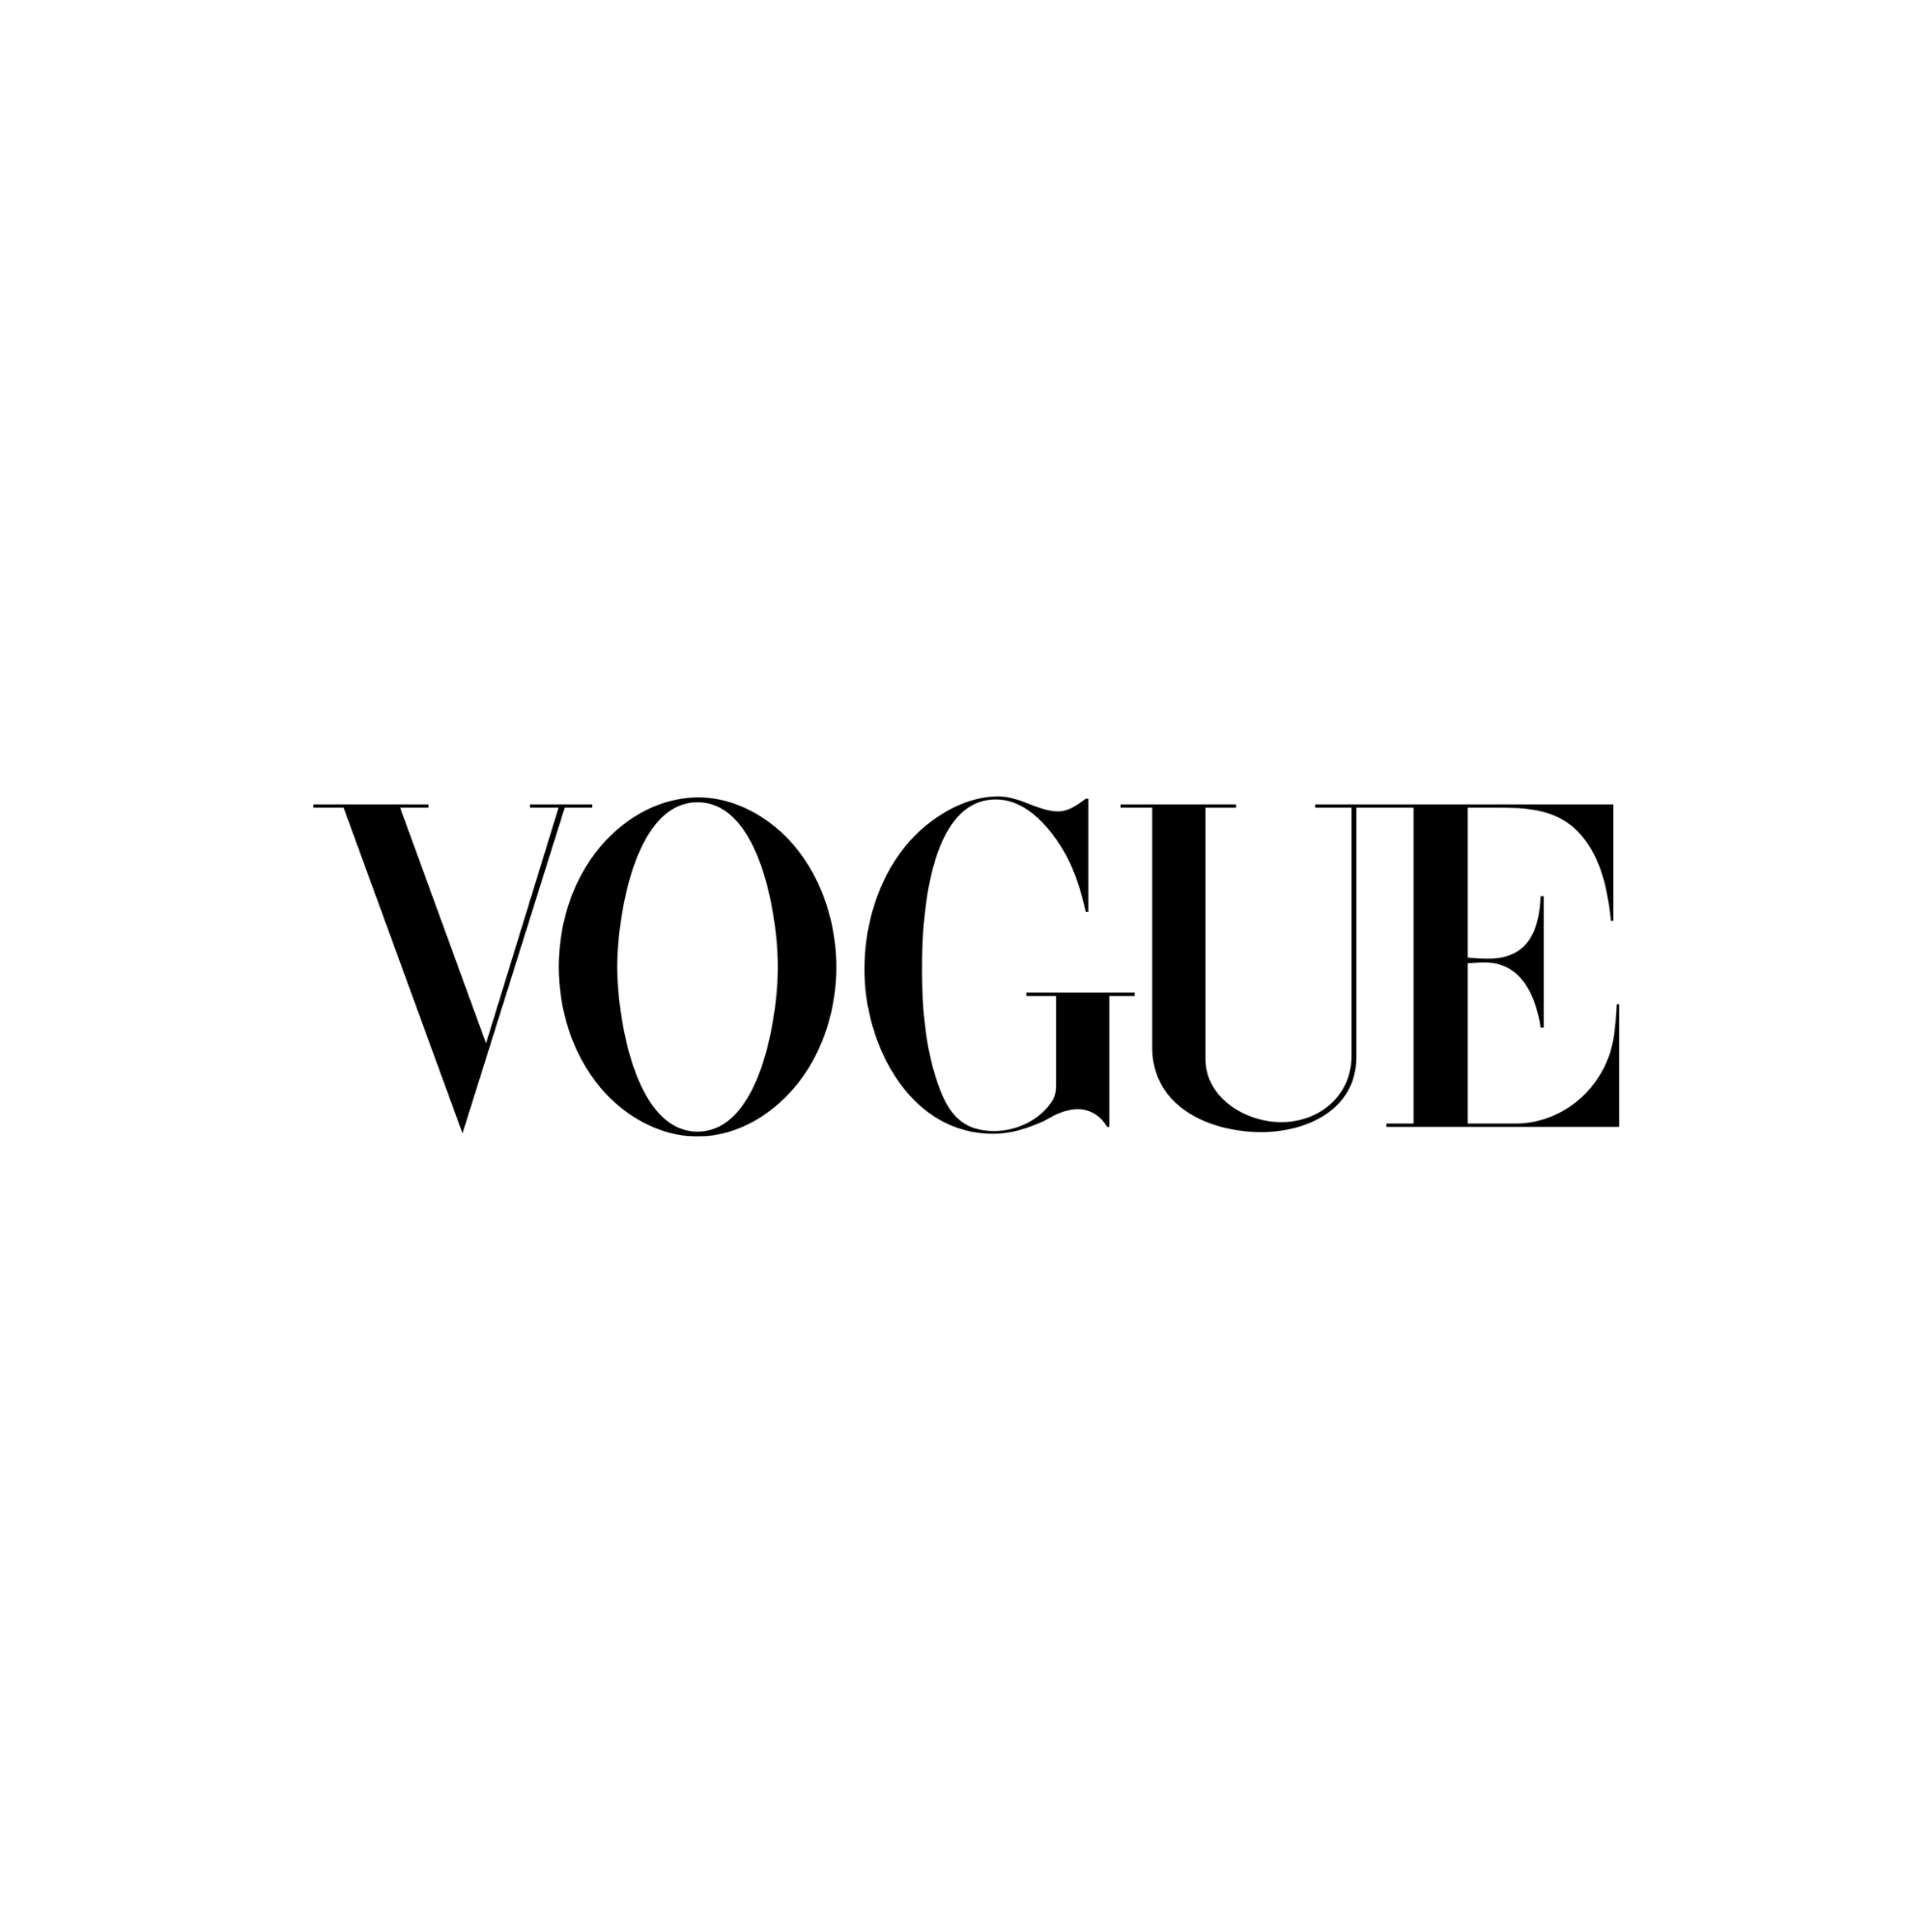 as seen in Vogue